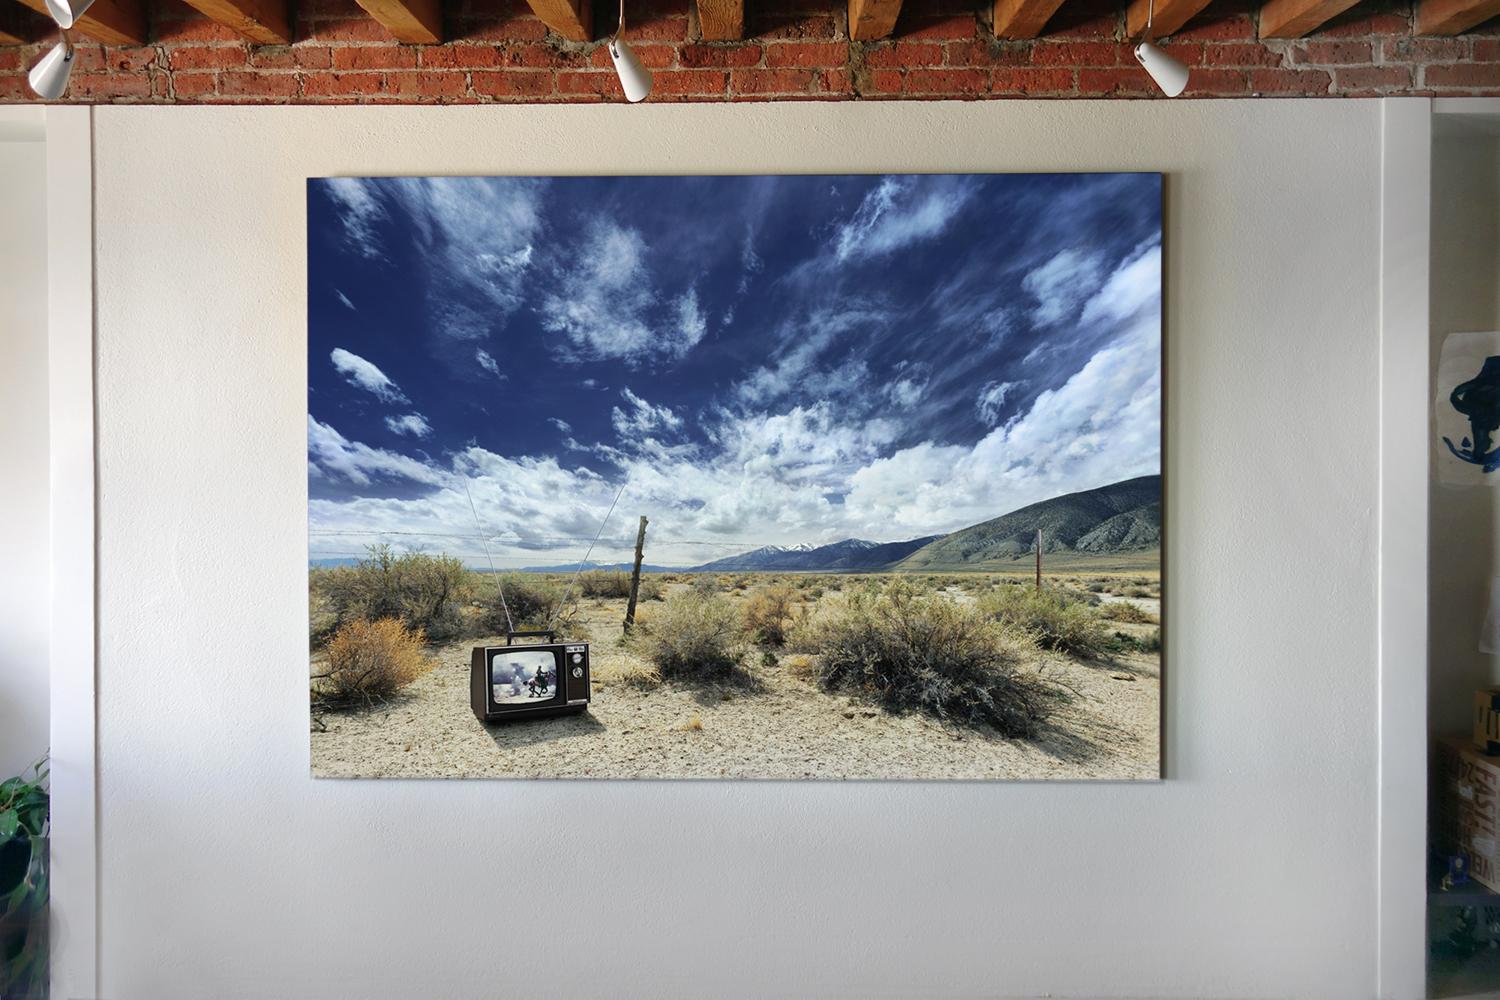 Cowboy TV - large format photograph of iconic Western scene American landscape - Photograph by Frank Schott